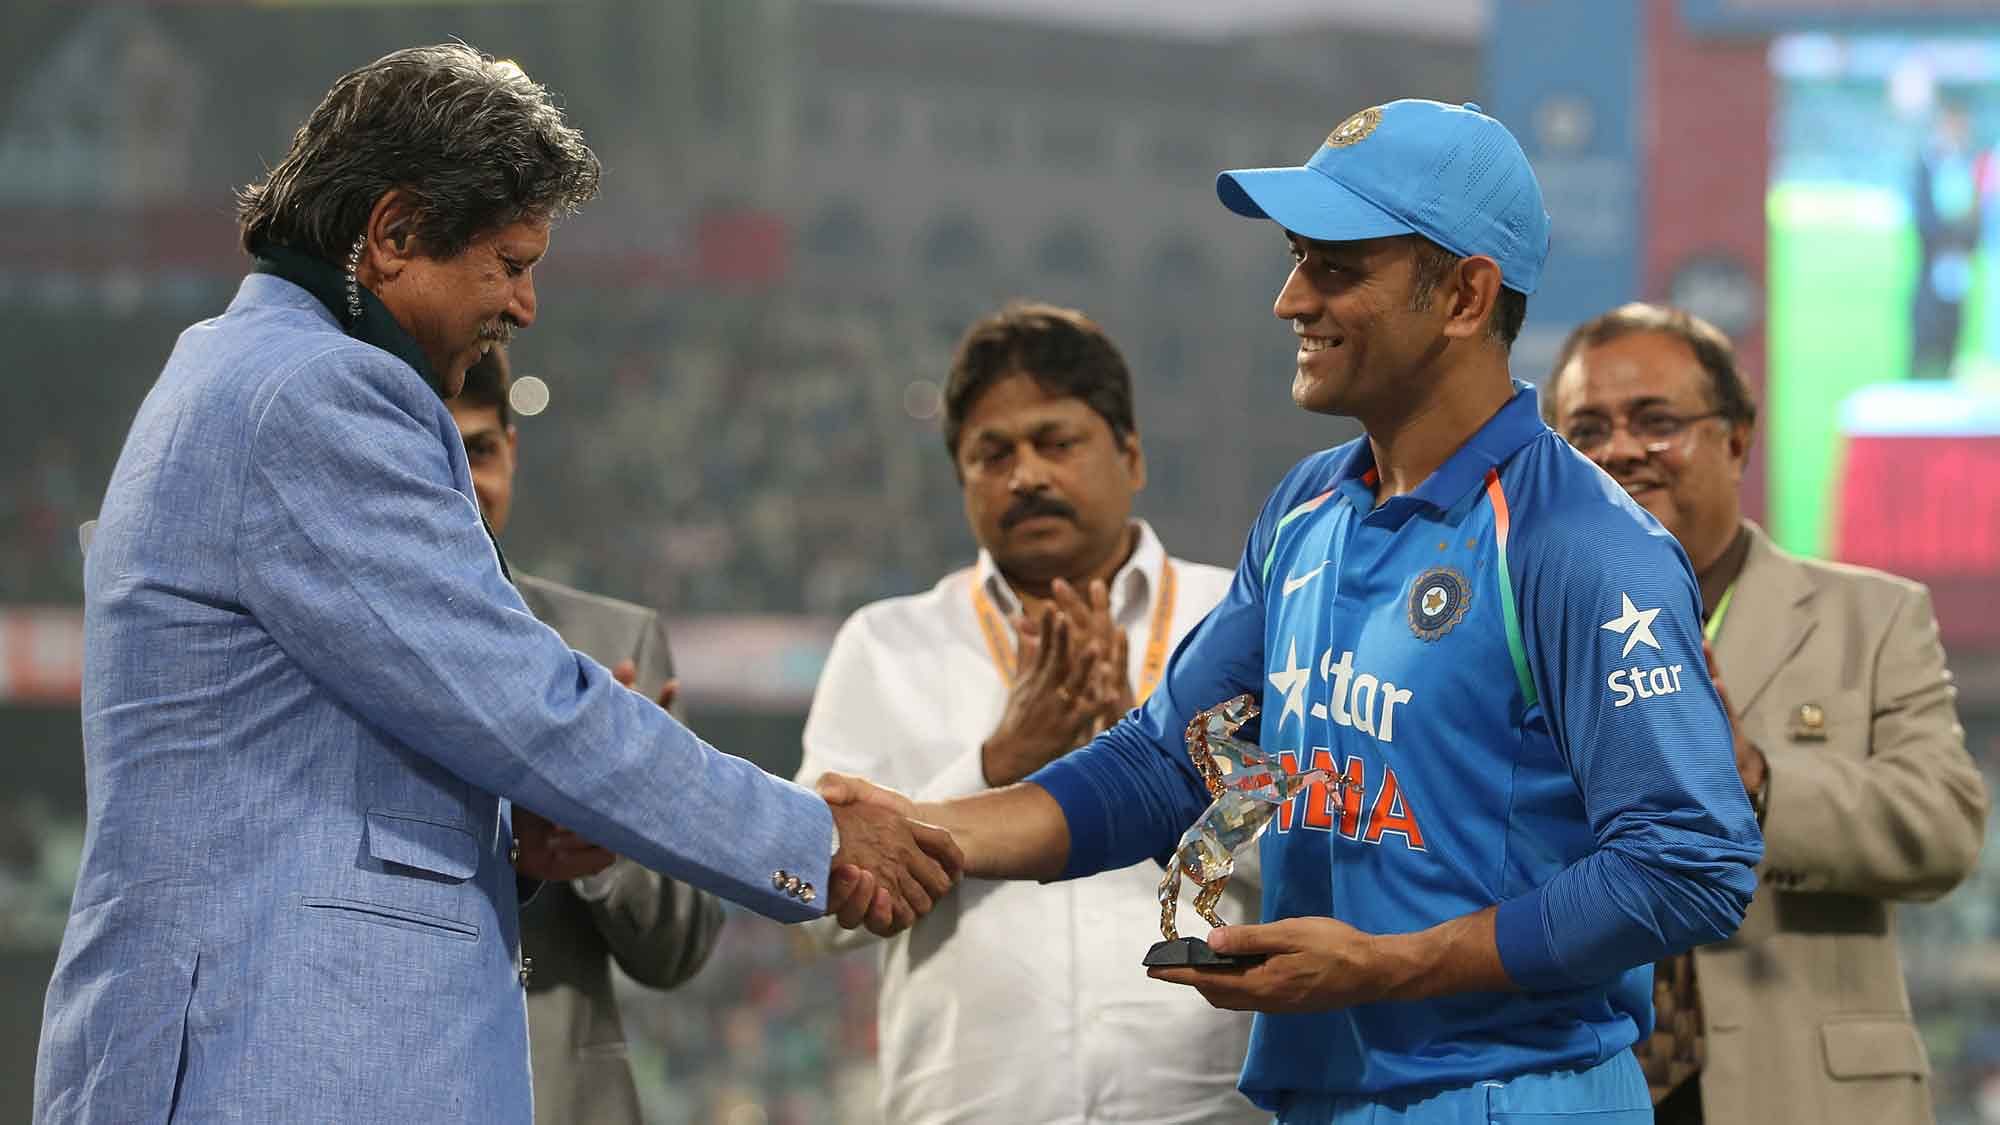 Former skipper Kapil Dev feels MS Dhoni’s comeback looks difficult as he has not played for a long time.